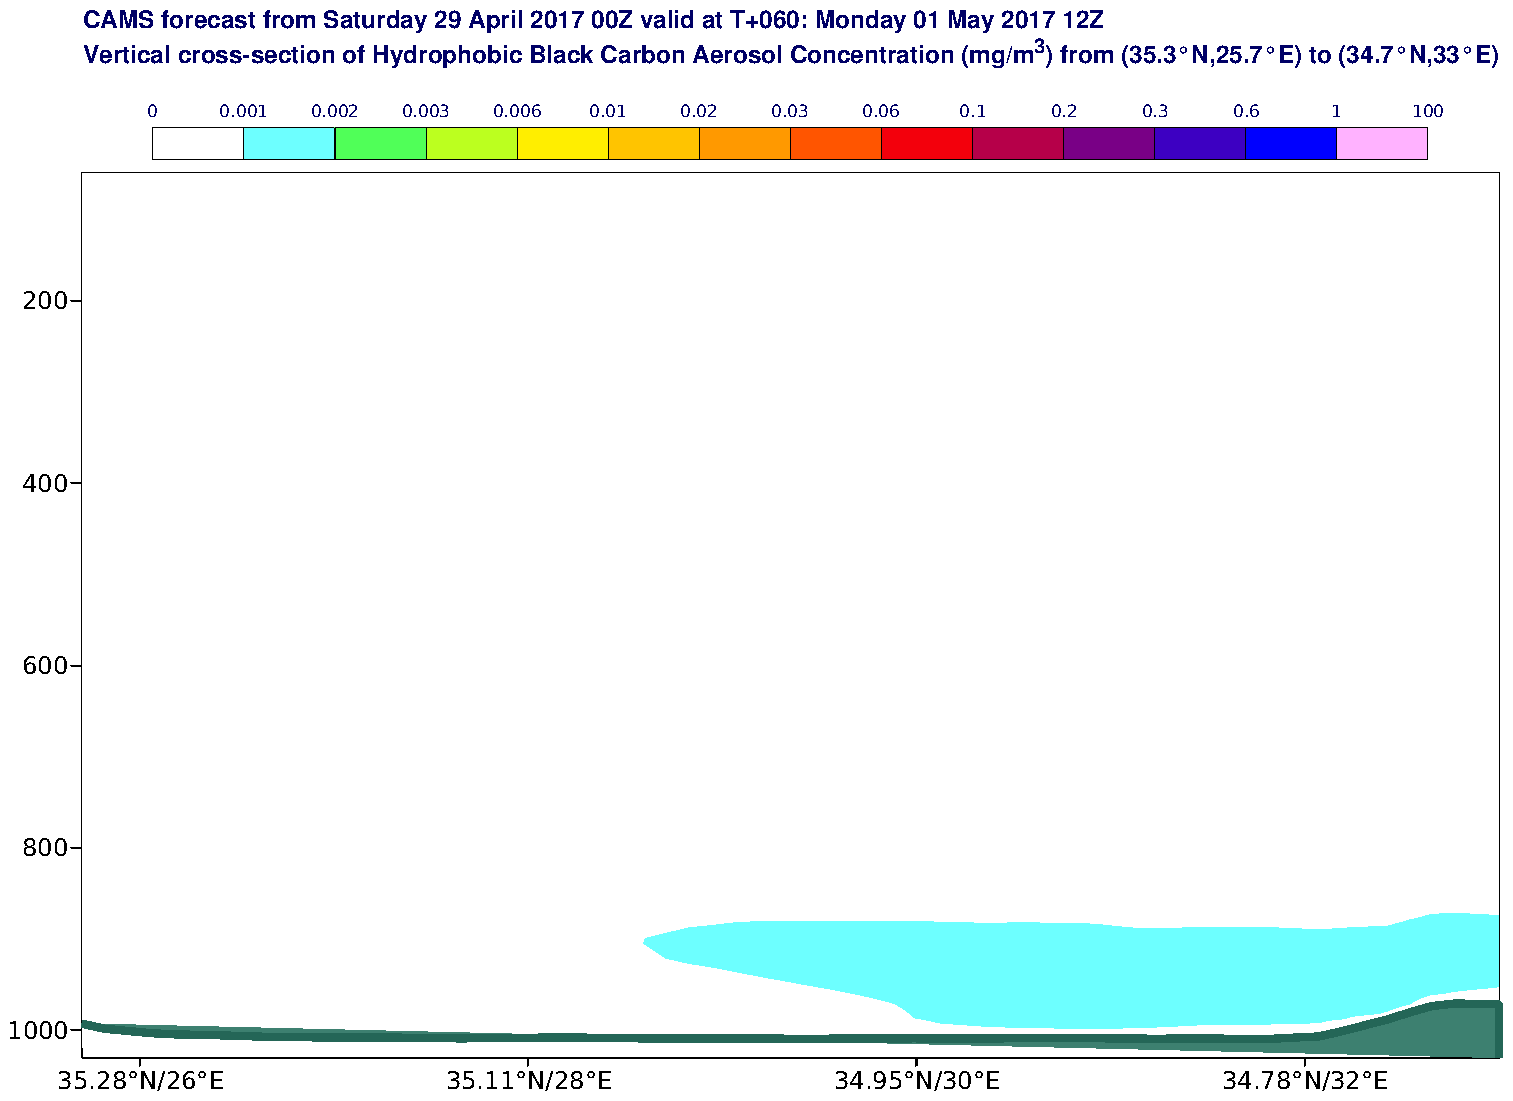 Vertical cross-section of Hydrophobic Black Carbon Aerosol Concentration (mg/m3) valid at T60 - 2017-05-01 12:00